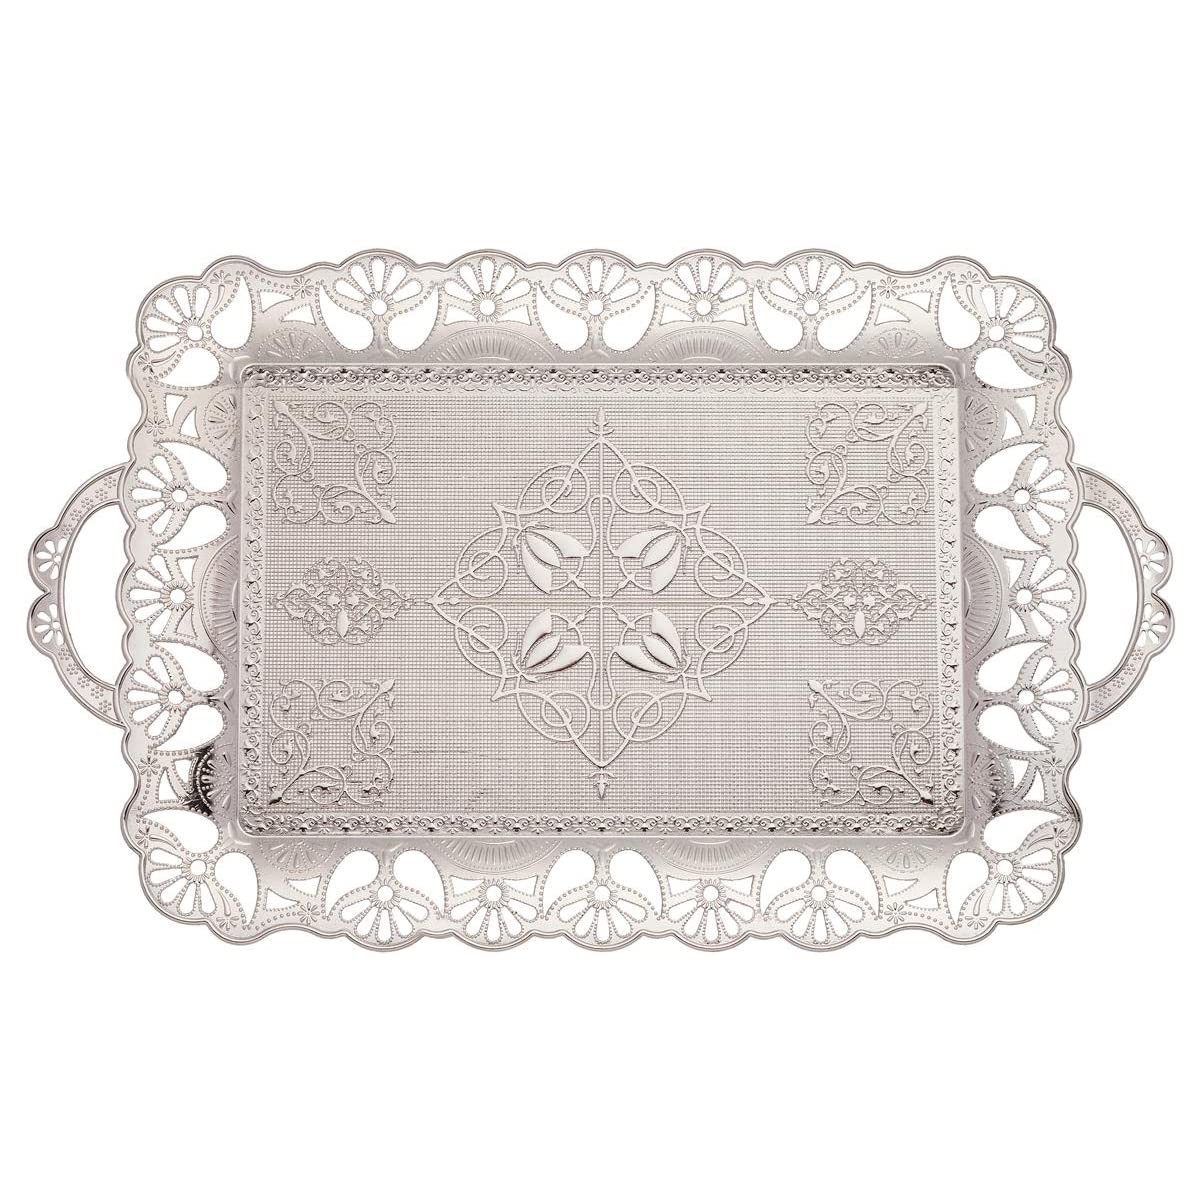 Alisveristime Handcrafted Large Turkish Ottoman Serving Tray with Floral Edges and Handles, Made from Zamac, Multi-Color Options (18.9" L x 12" W x 0.78" H) (Silver)